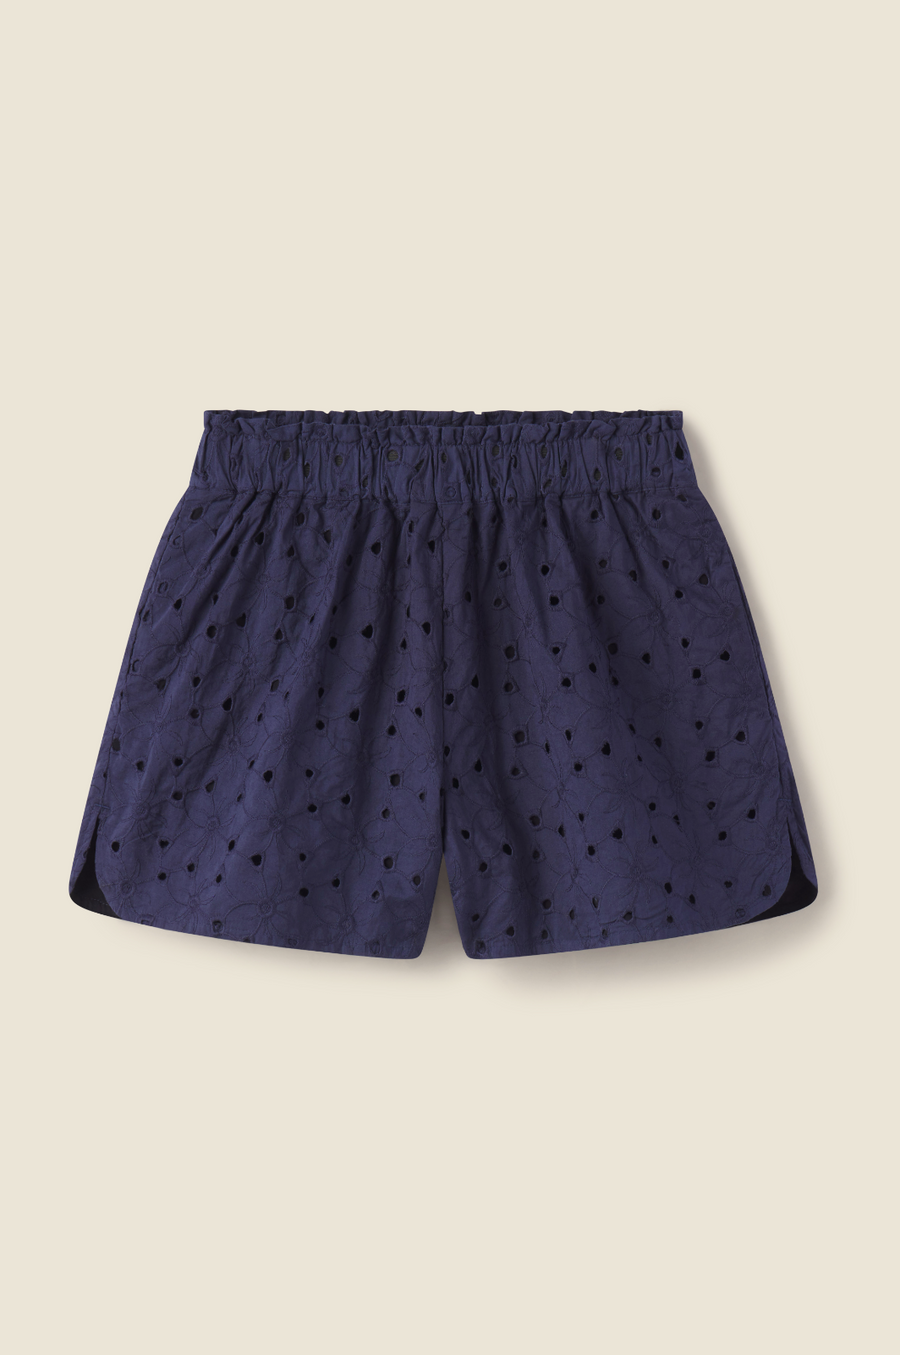 Lucy Short - Inkwell Eyelet